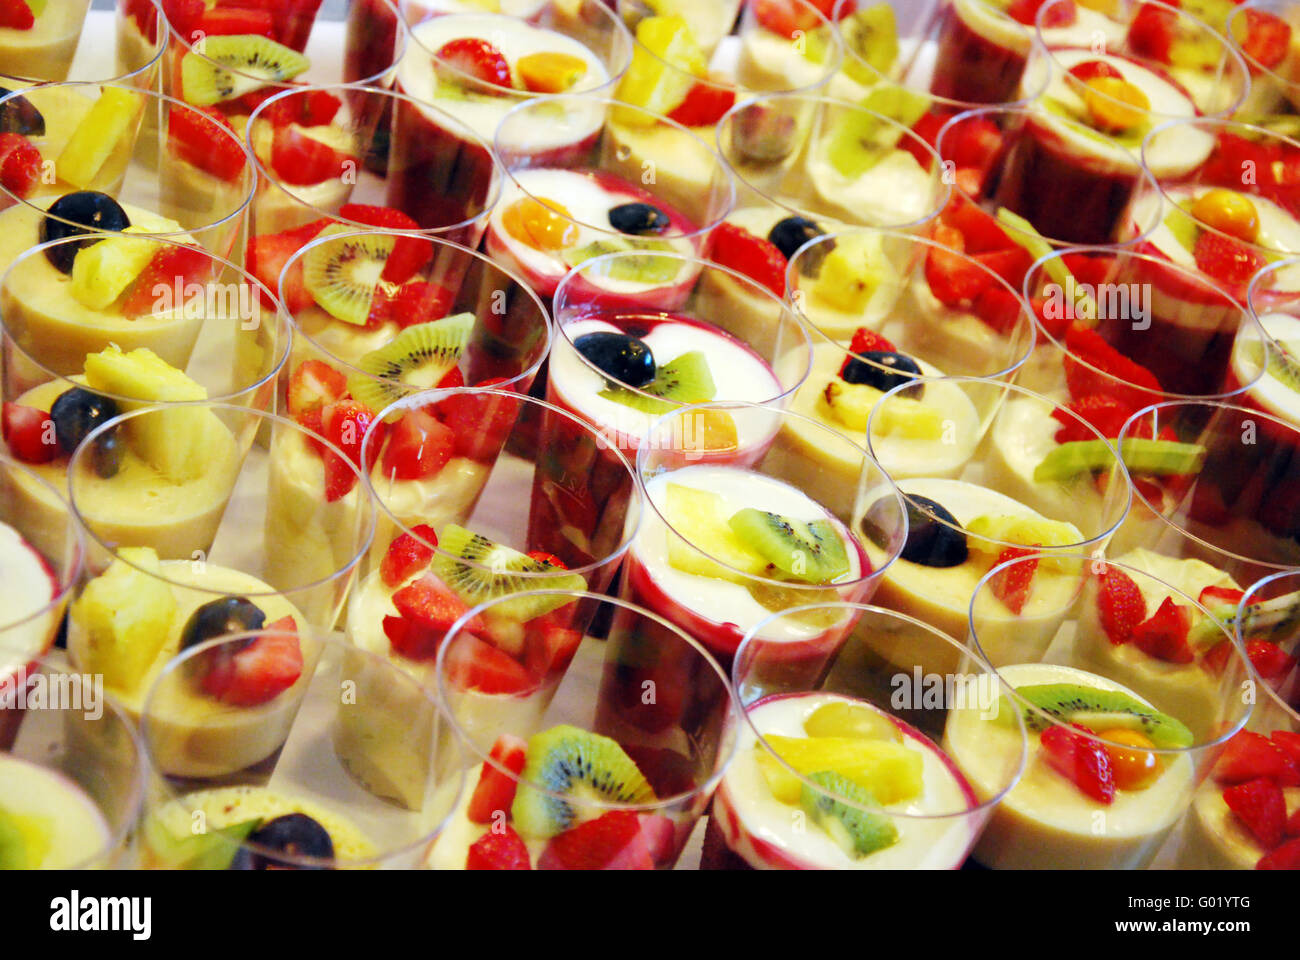 mousse au chocolat and red fruit jelly dessert Stock Photo